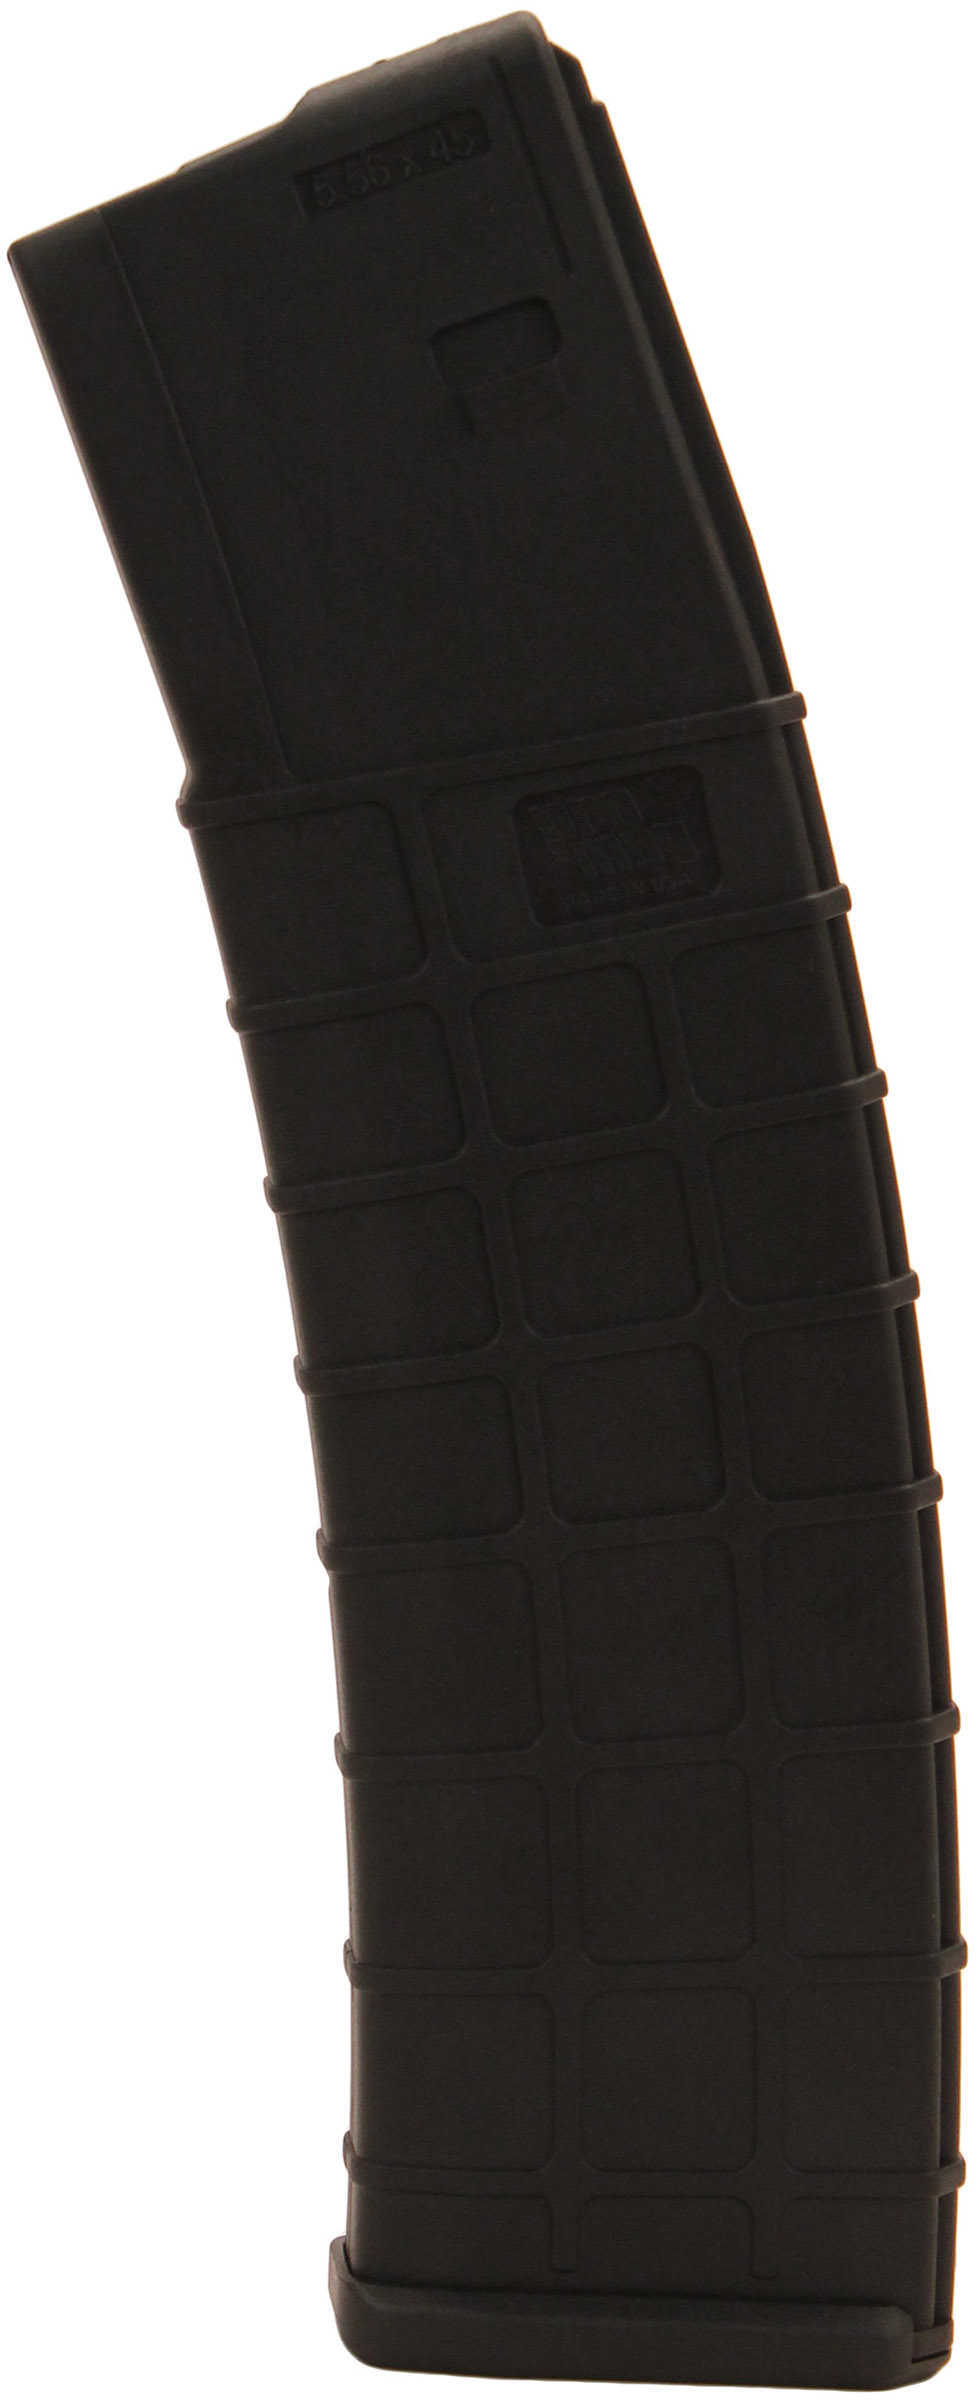 PROMAG AR-15 223/5.56 40RD BLK POLY